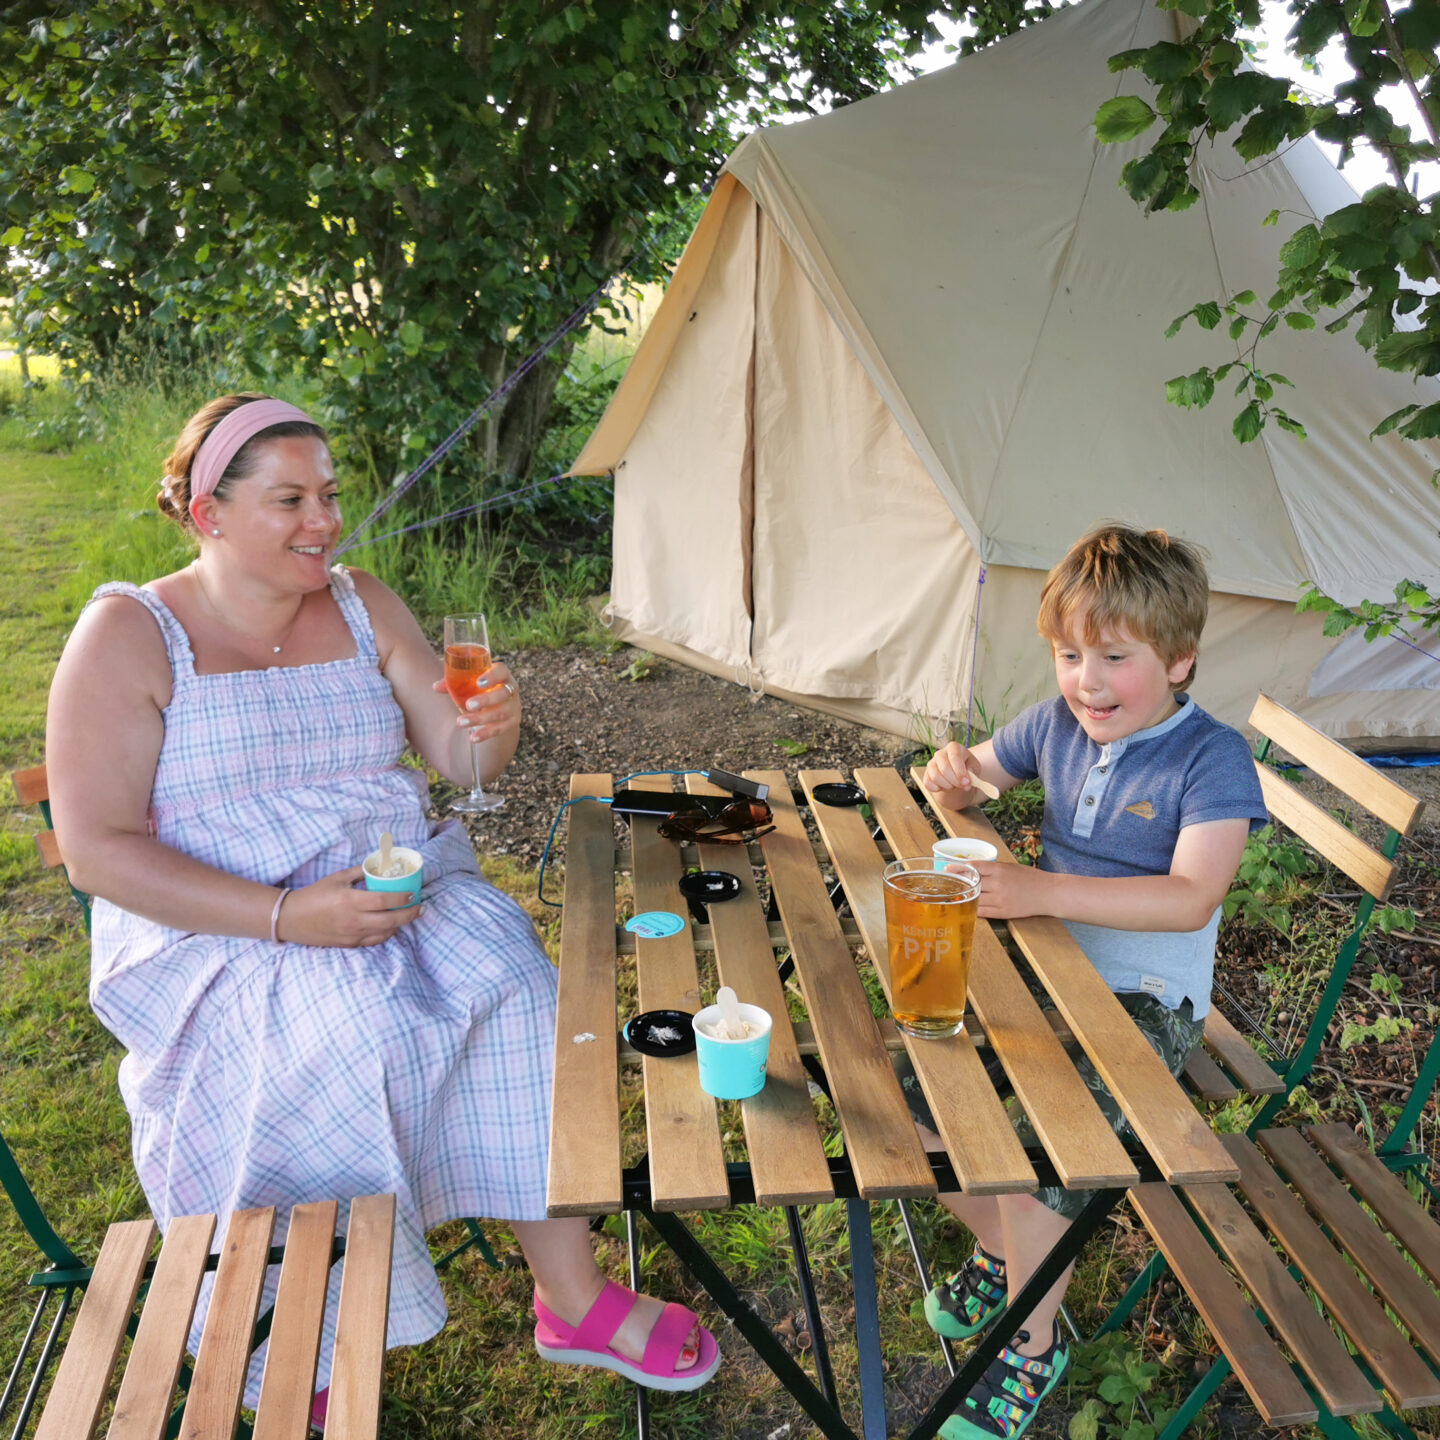 Woolton Farm, Glamping in a Bell Tent, Bell Tent, Glamping, Kent Venue, The Barn At Woolton Farm, Kent, Visit Kent, Family Day Out, Local Food, Kentish Pip Cider, South African BBQ Food, the Frenchie Mummy, Family-Friendly, Wine Tours, Kentish Wines, English Wines